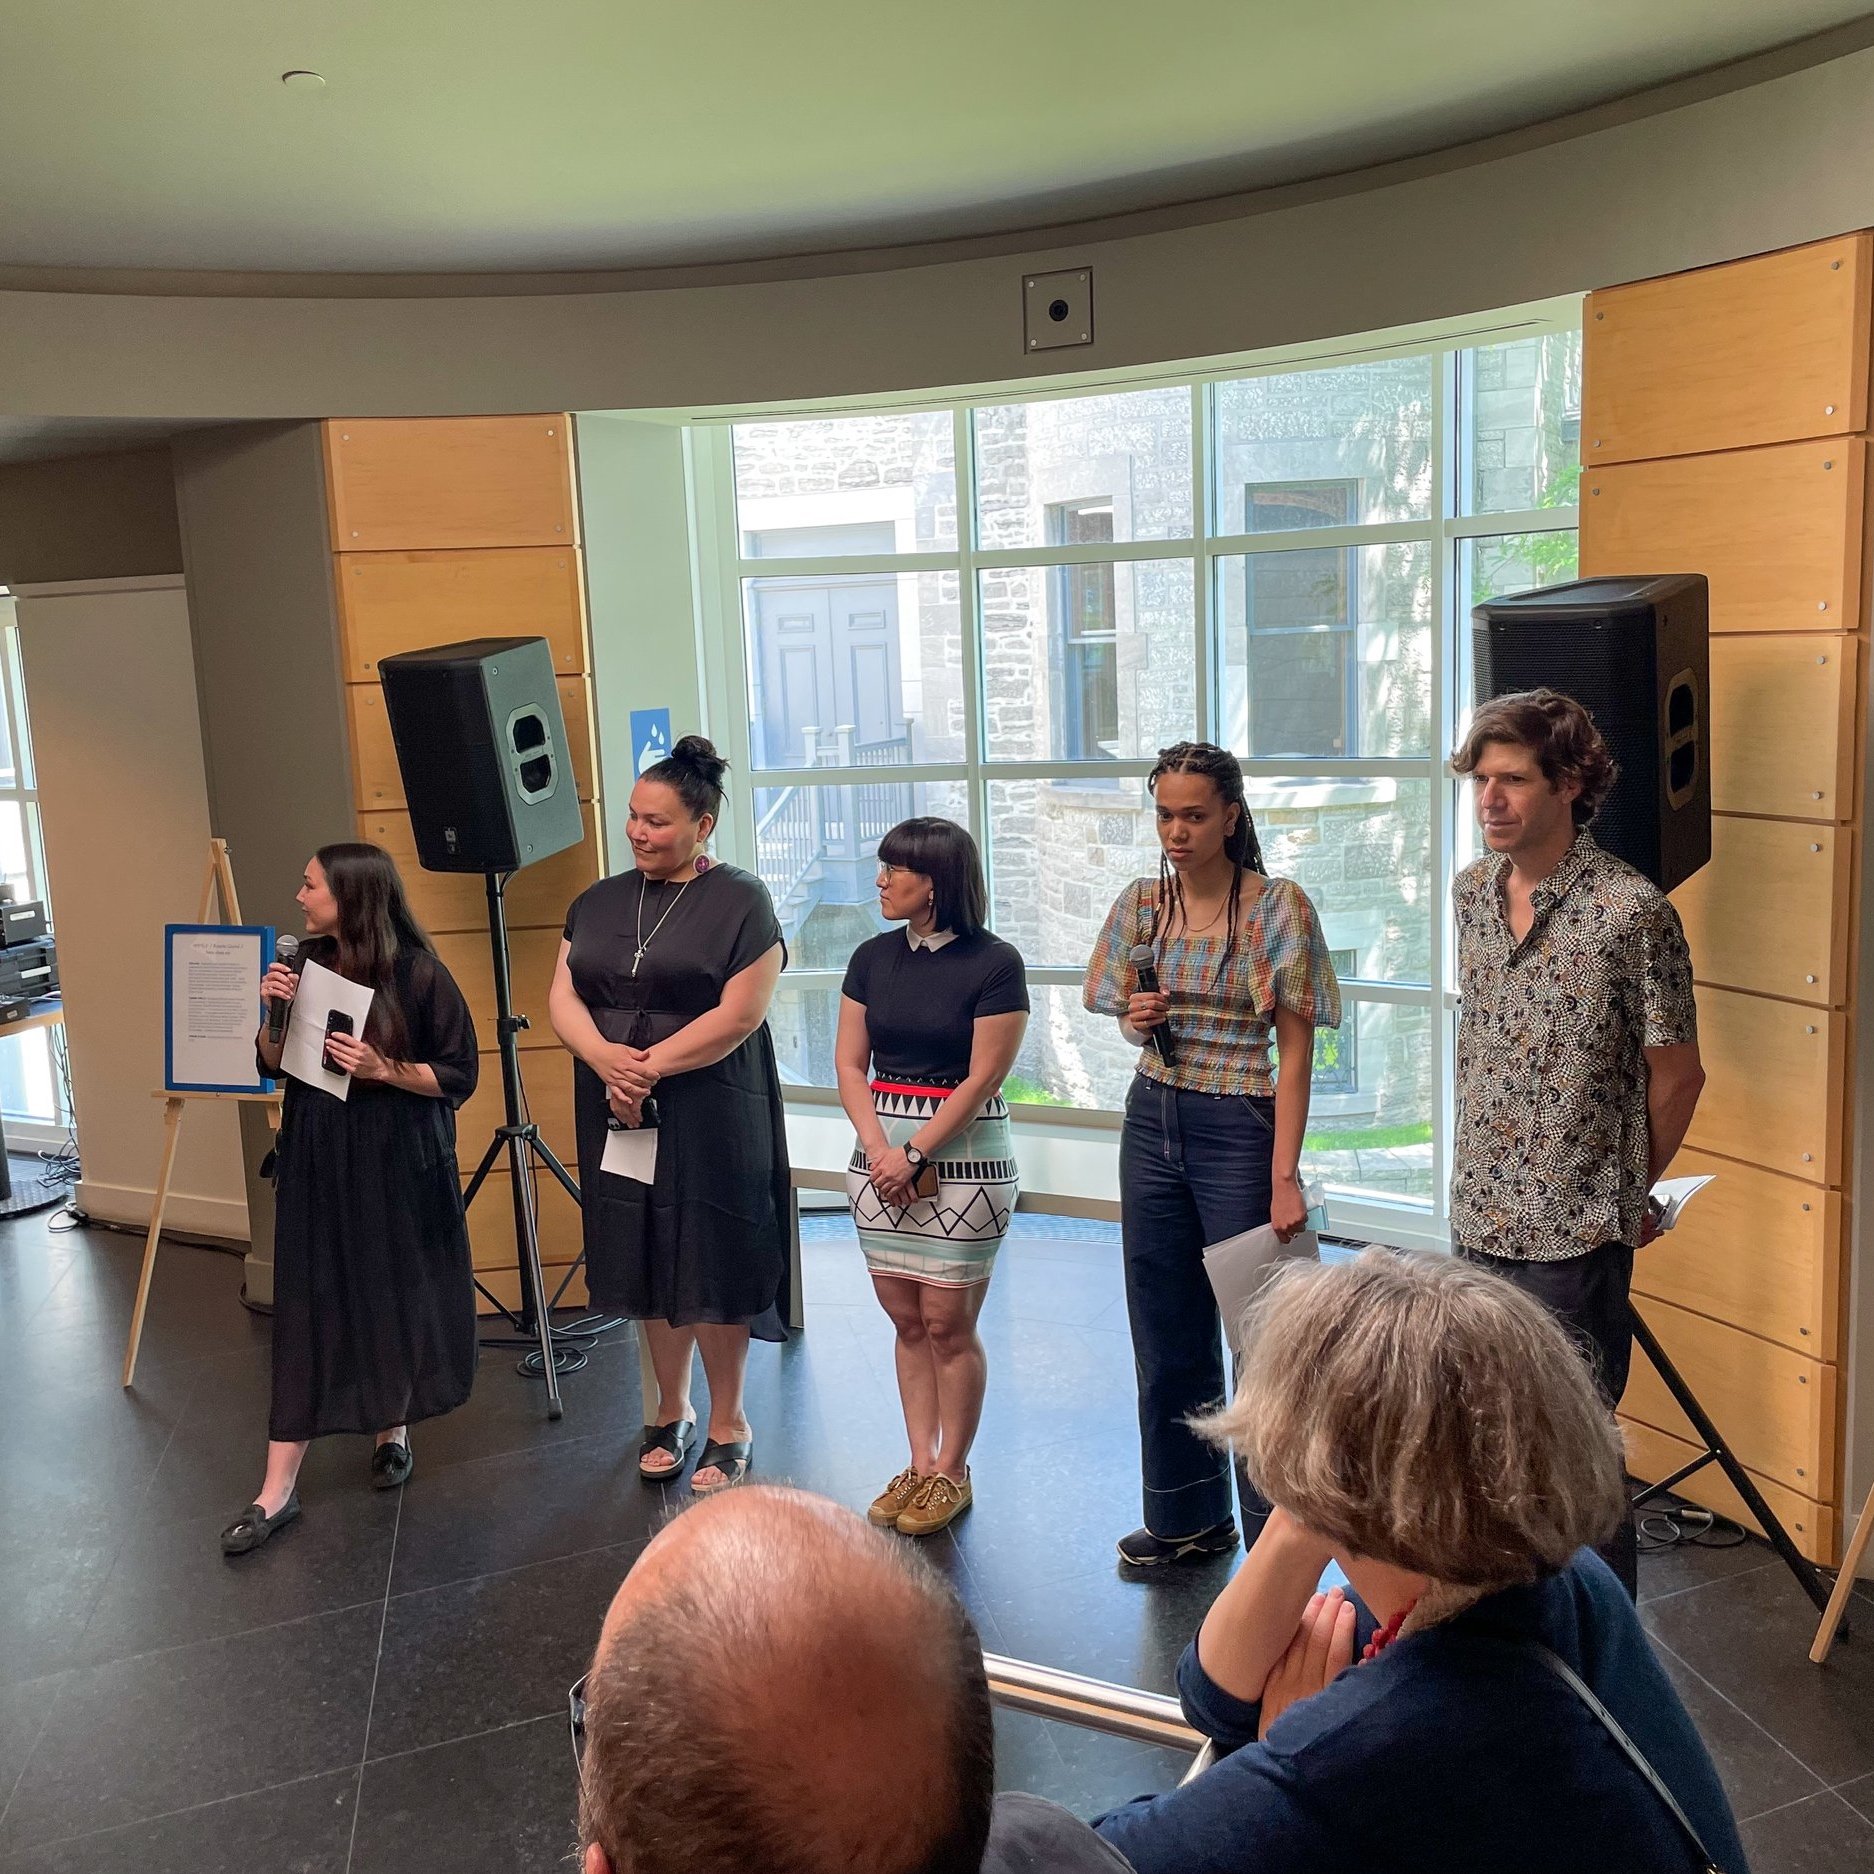  Members of the curatorial team welcome visitors to the exhibition opening of  ᐊᖏᕐᕋᒧᑦ / Ruovttu Guvlui /Vers chez soi / Towards Home , Canadian Centre for Architecture, Montreal, QC, June 11, 2022. Photo by Maggie Hinbest. L to R: Nicole Luke, Taqral